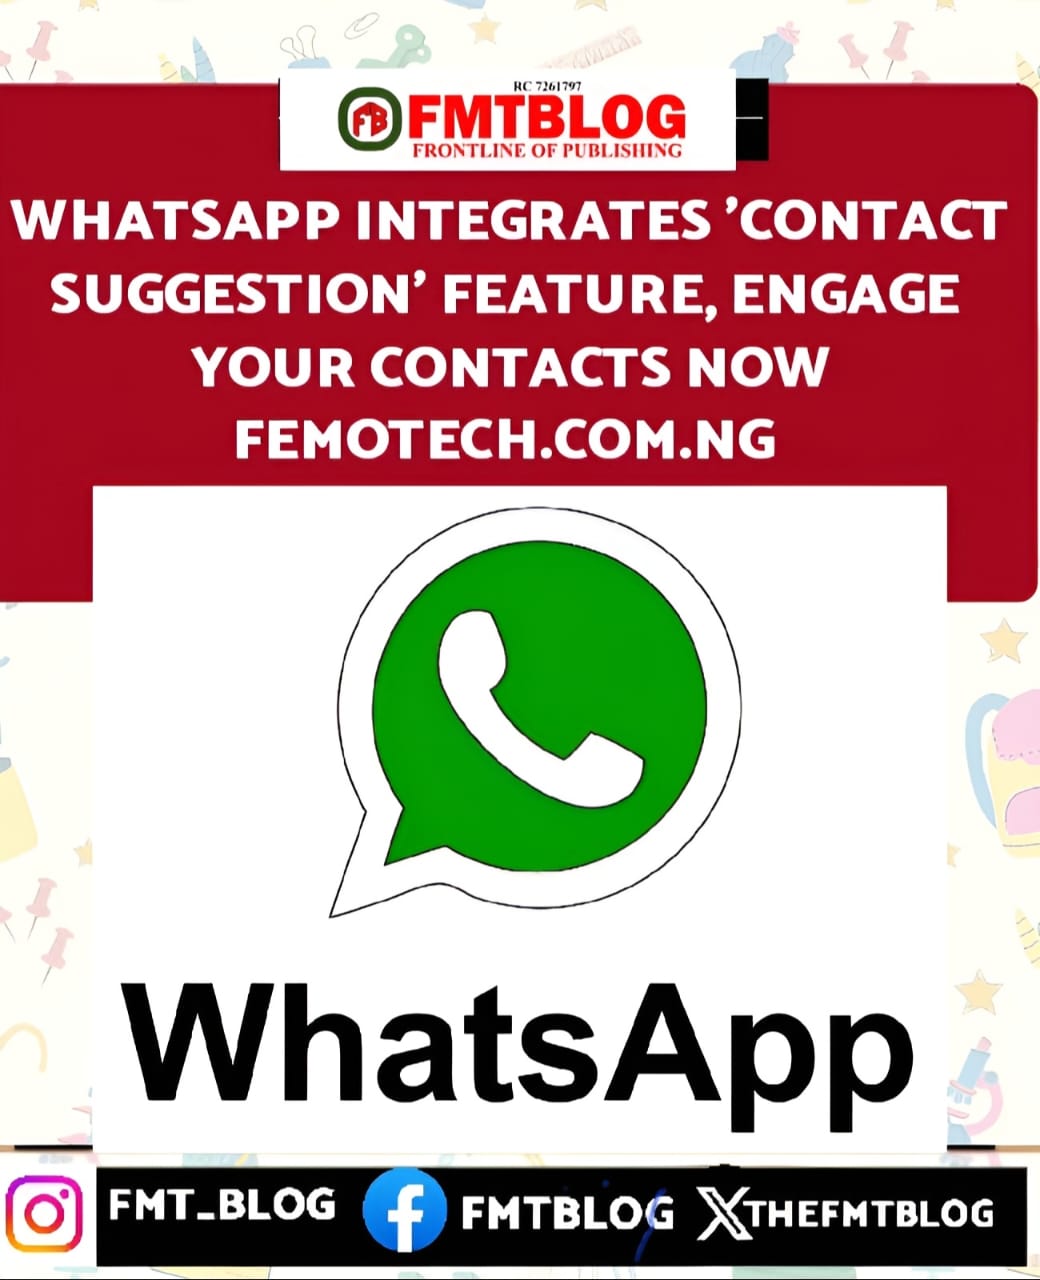 WhatsApp Integrates ‘Contact Suggestion’ Feature, Engage Your Contacts Now